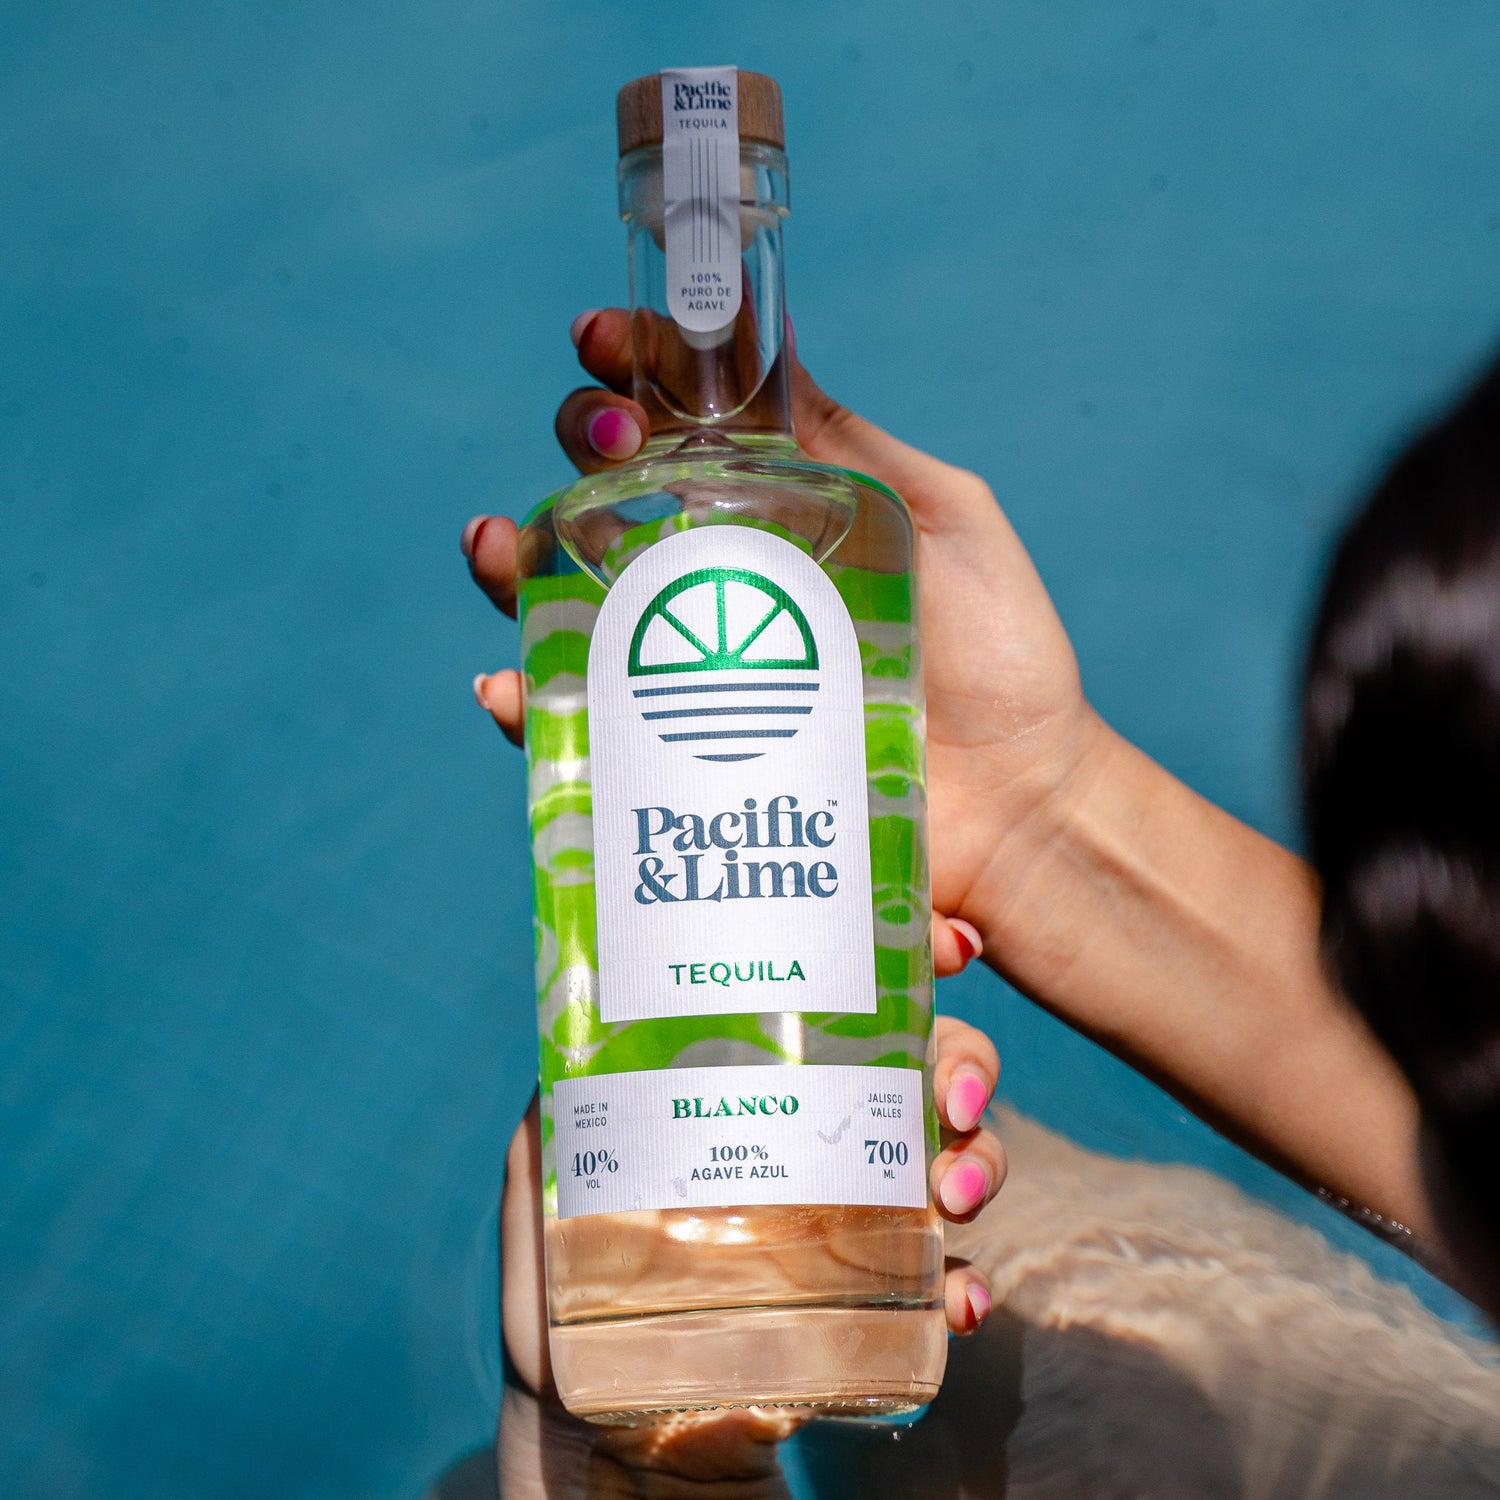 Pacific & Lime Tequila | Blanco | 70cl ∙ 40% vol - Pacific & Lime